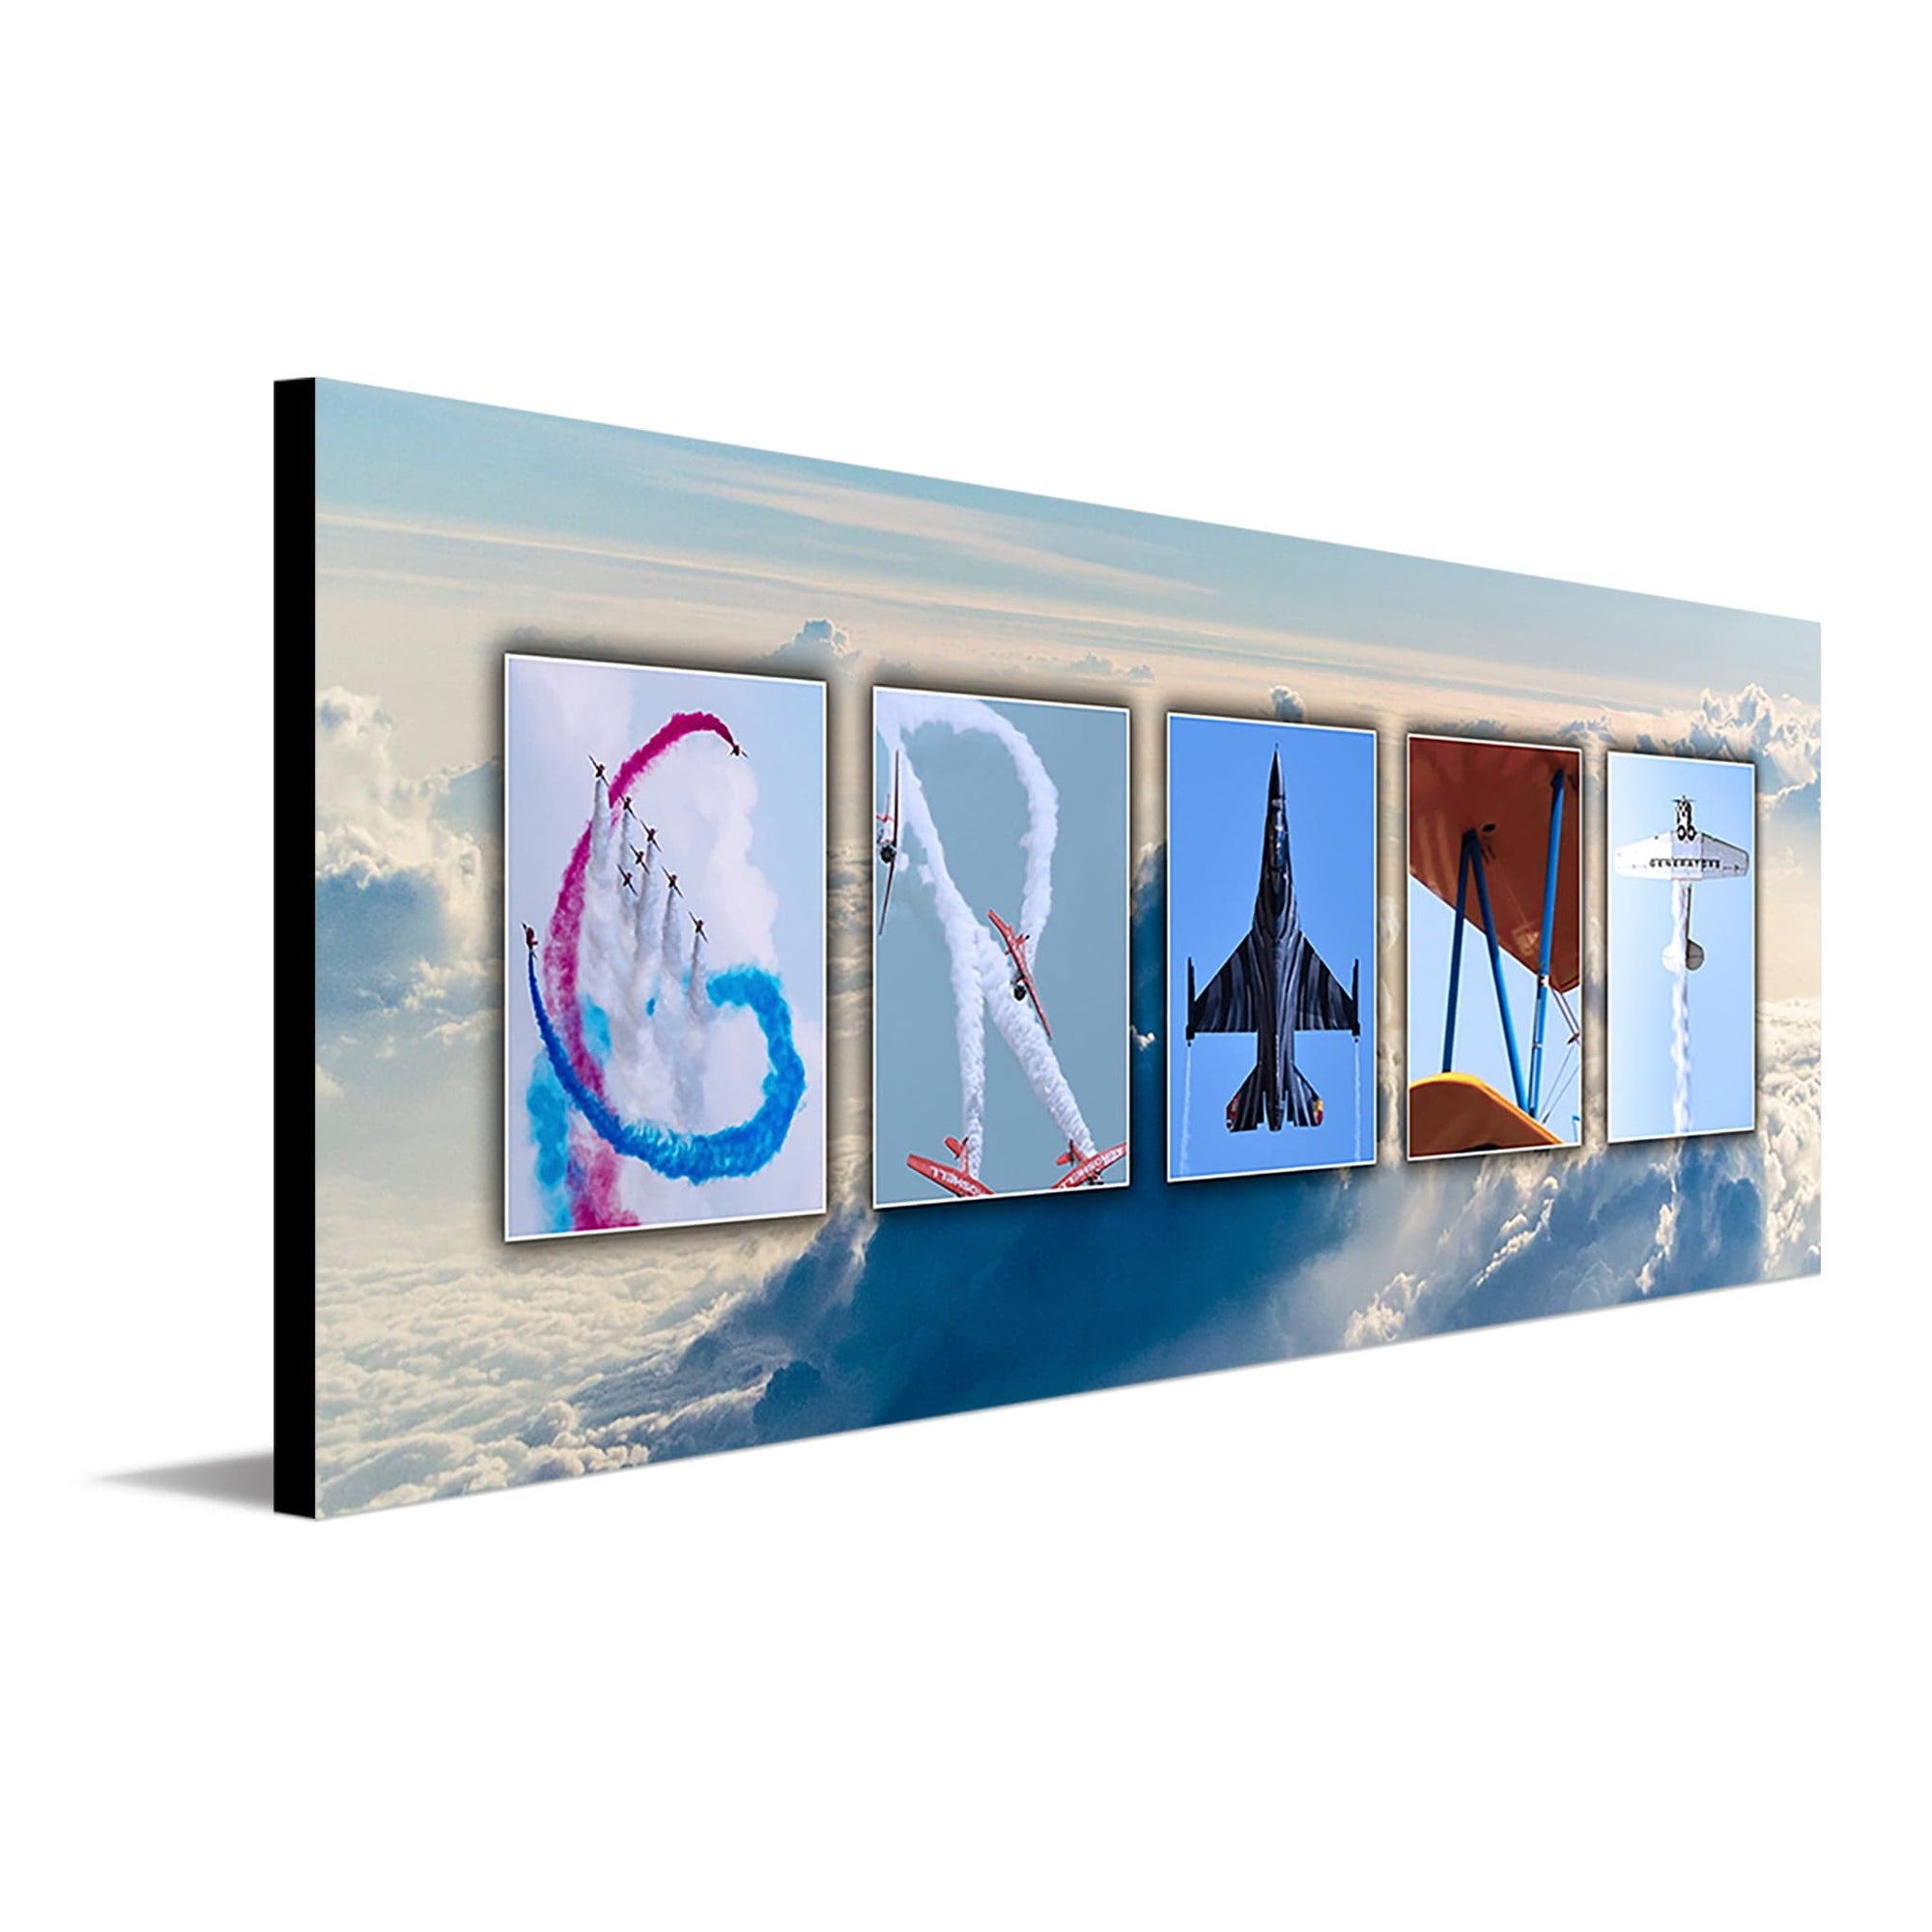 Personal-Prints’ Aviation & Airplane Personalized Name Art.